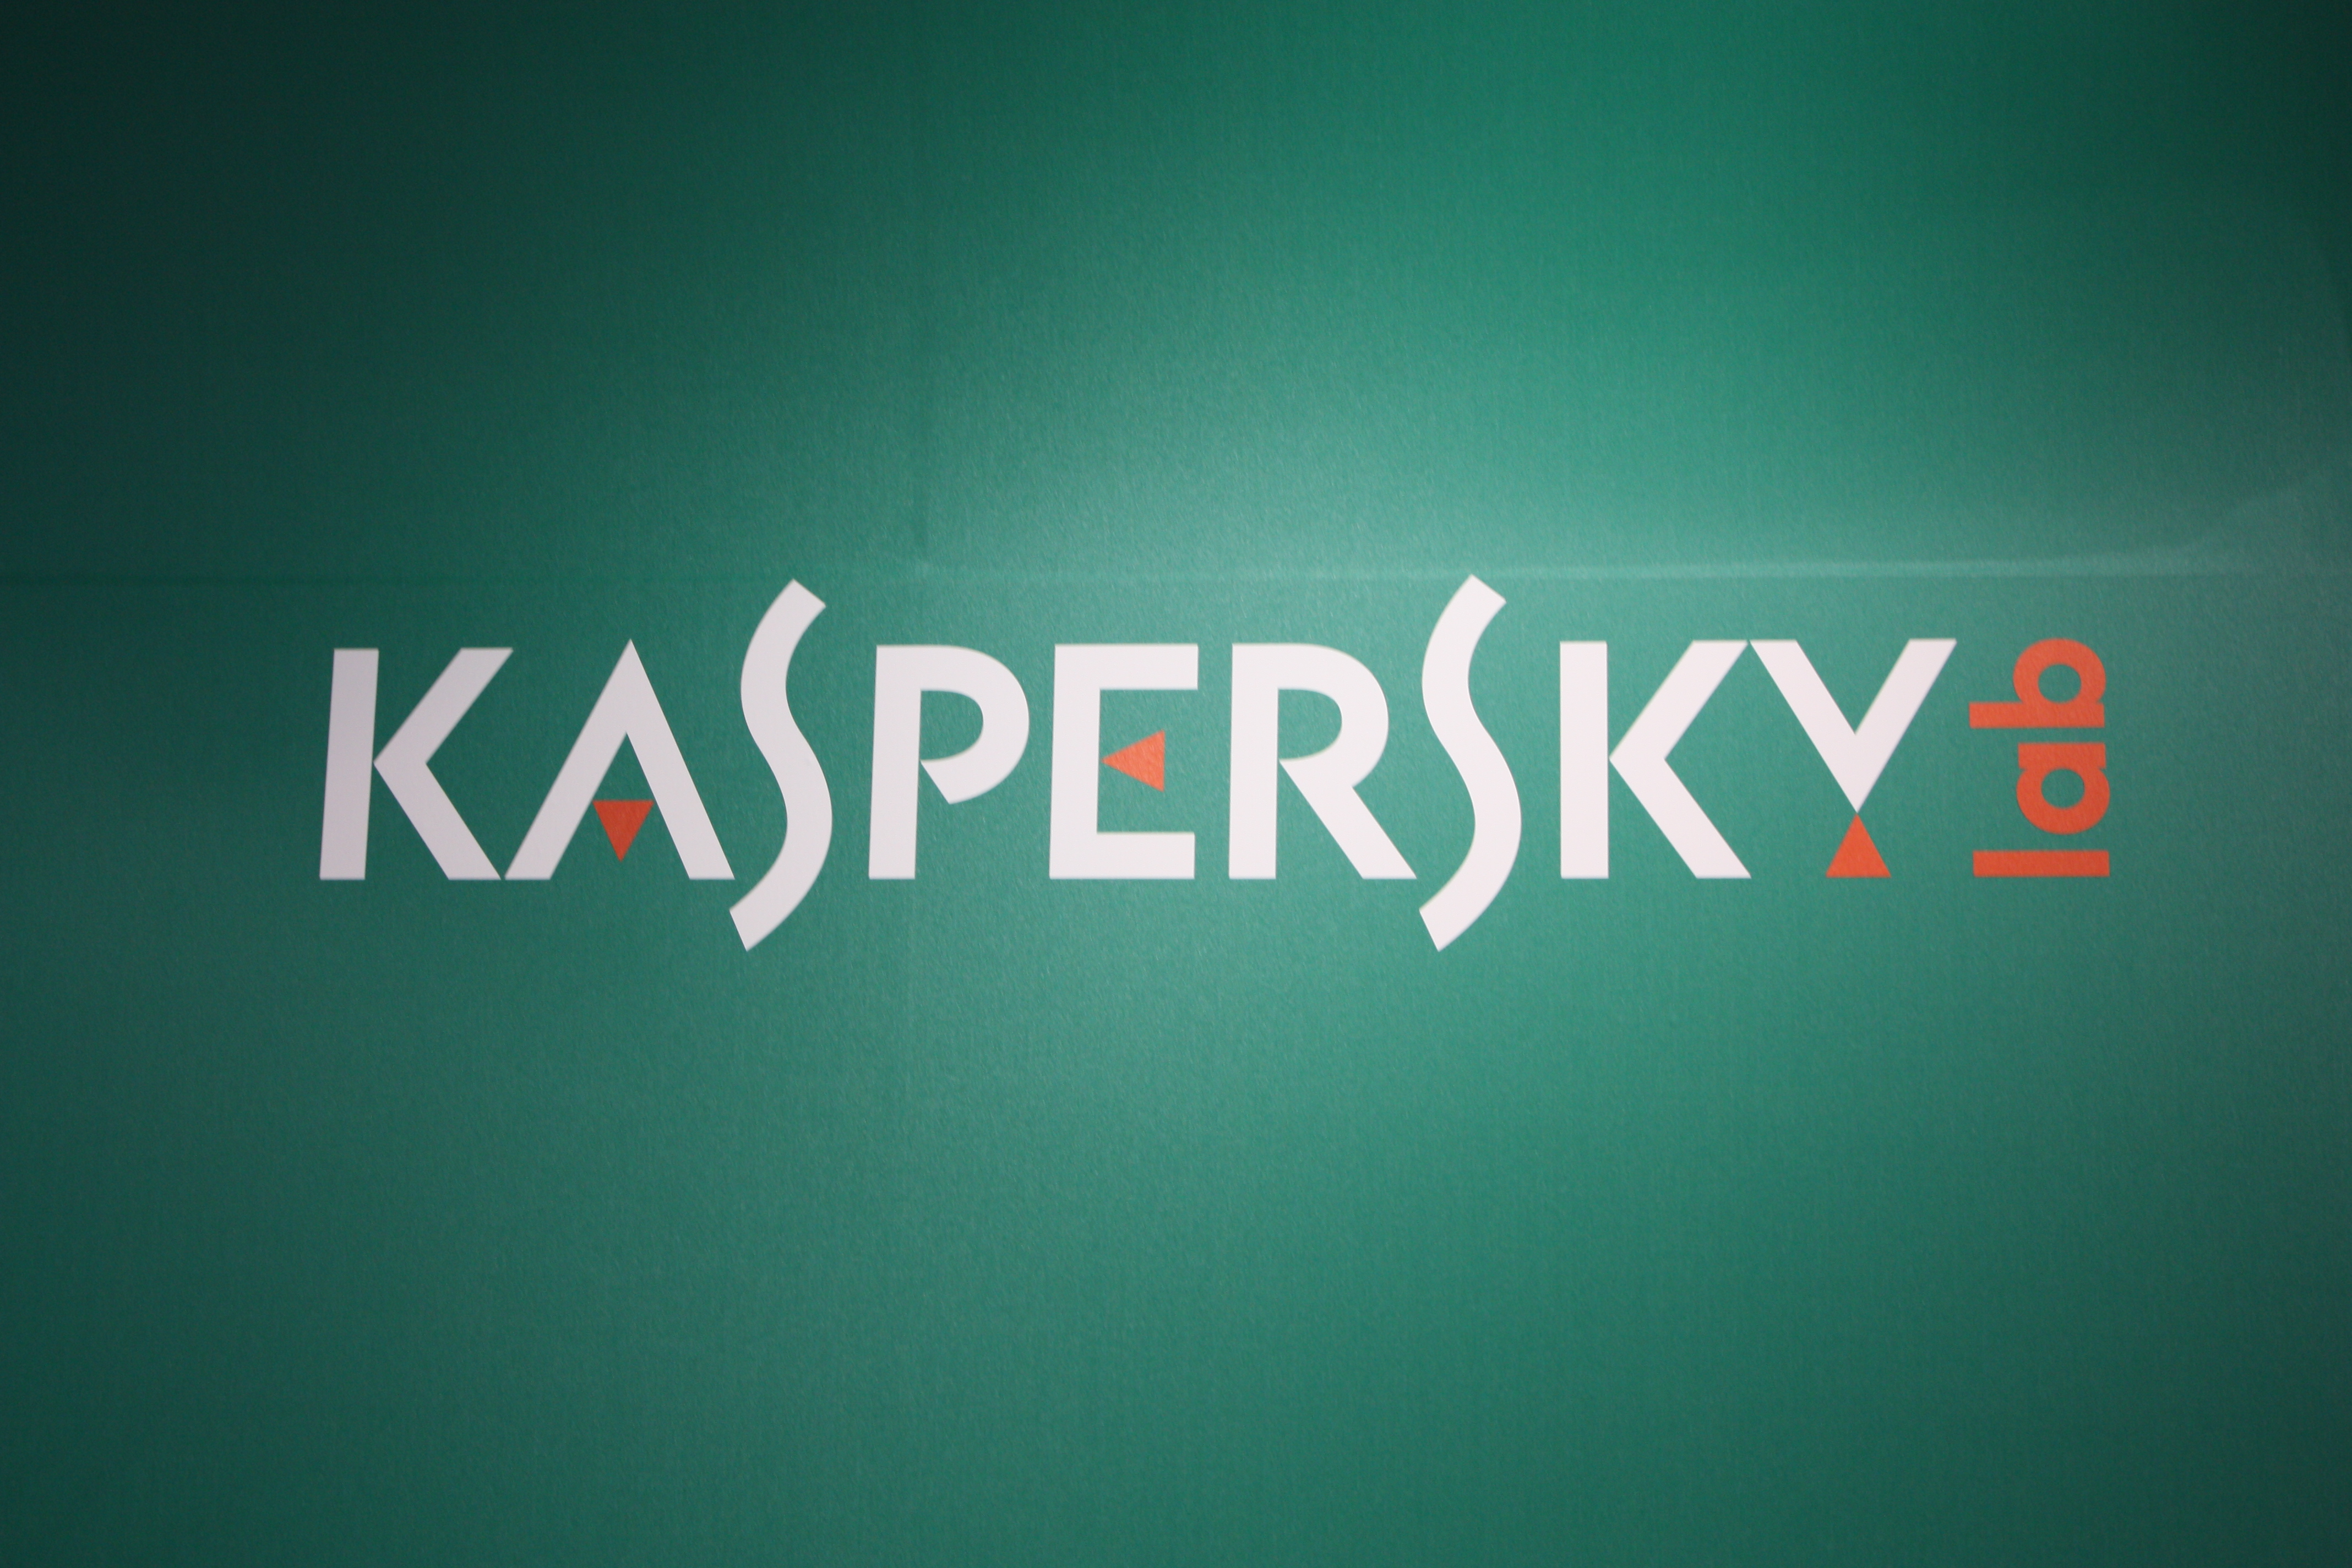 Kaspersky provides free services to protect from cyber threats during COVID-19